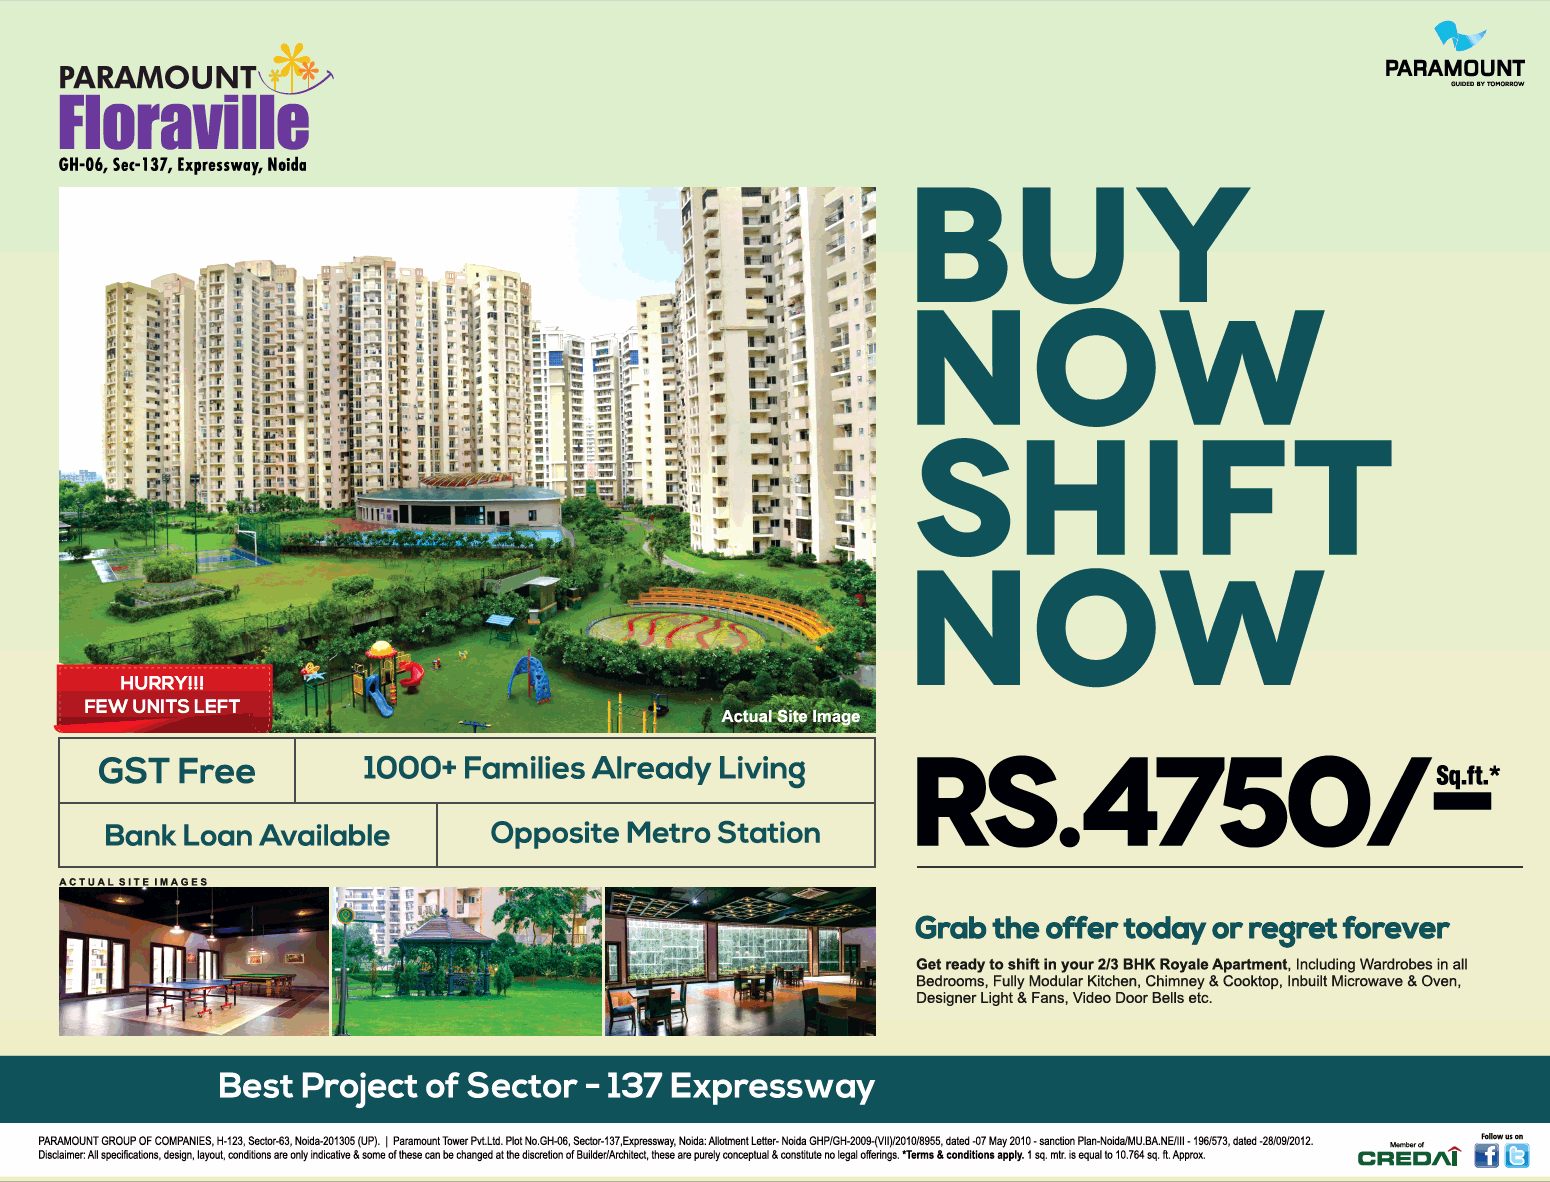 Grab the offer today at just Rs. 4750 per sqft. at  Paramount Floraville in Noida